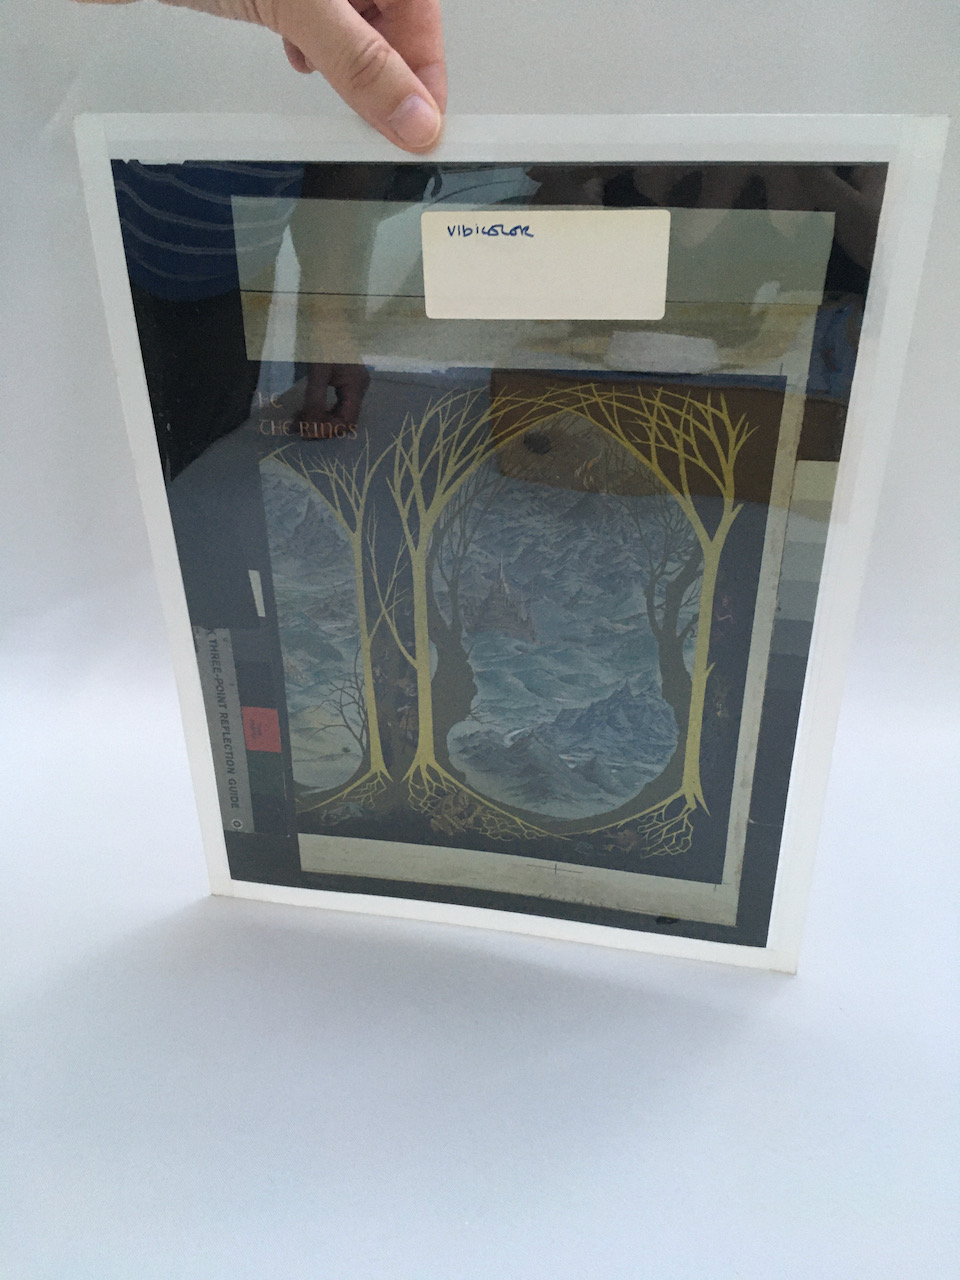 Original transparency for slipcase to the deluxe edition of The Lord of the Rings. Allen & Unwin - 1963- 1964